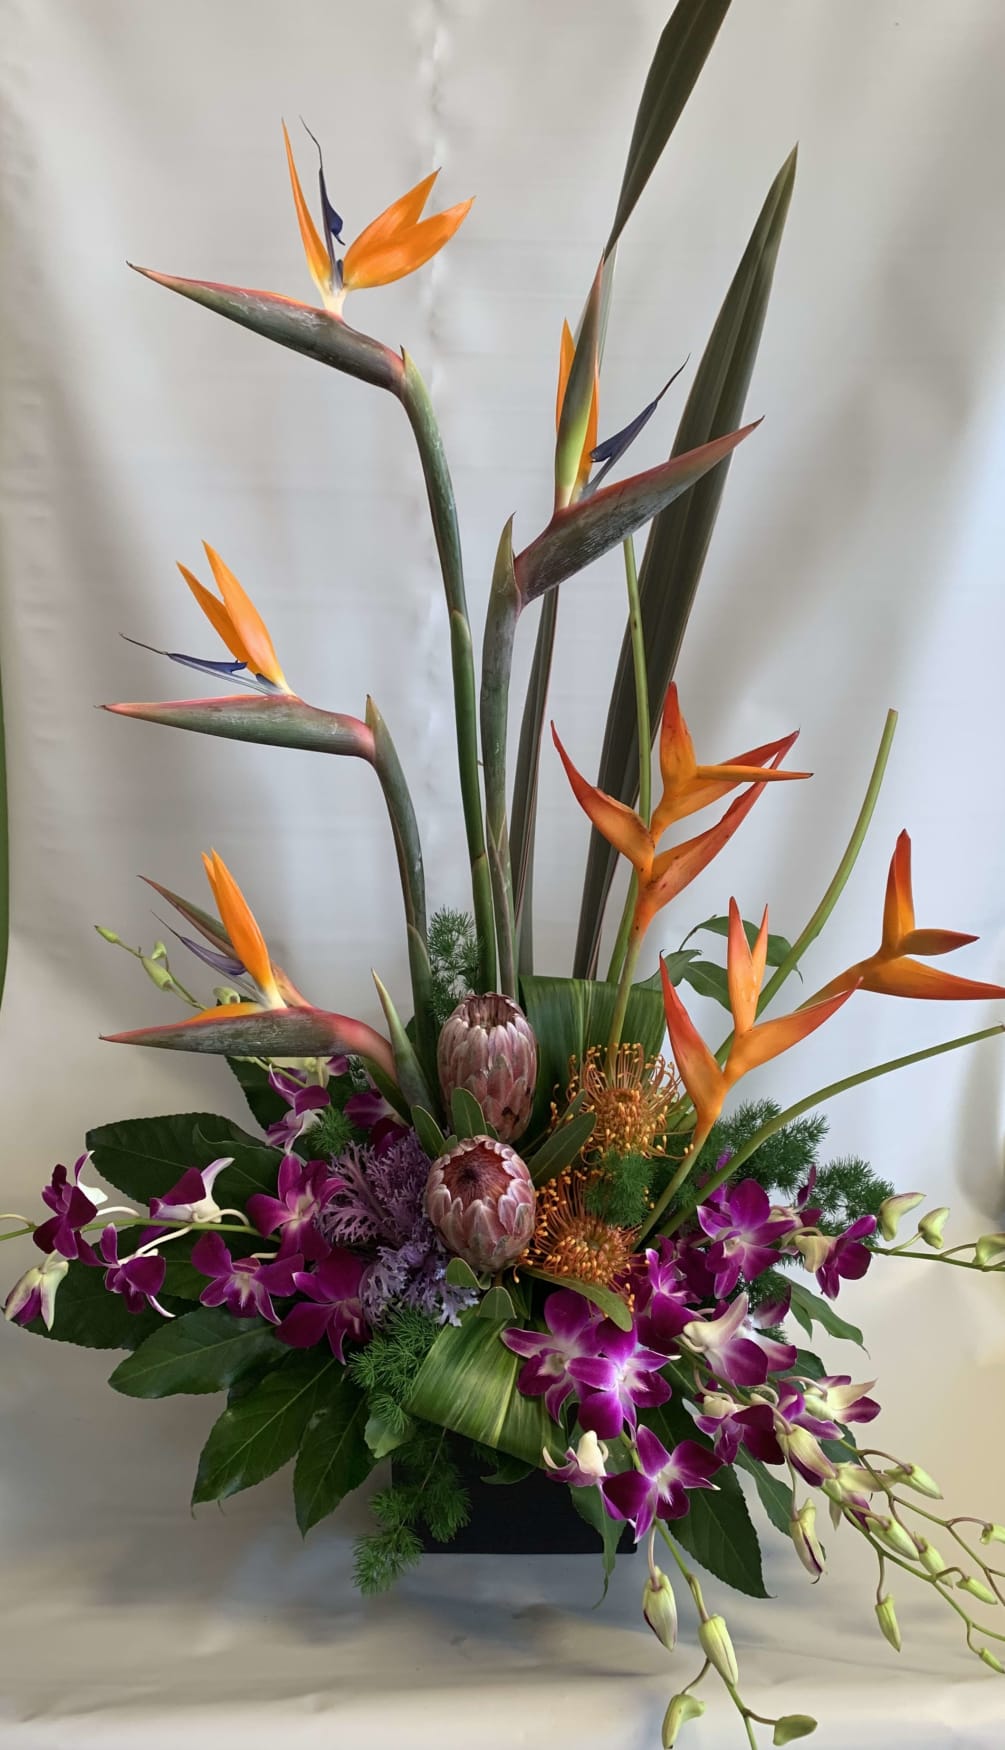 Birds of Paradise rise out of a bed of orchids and proteas